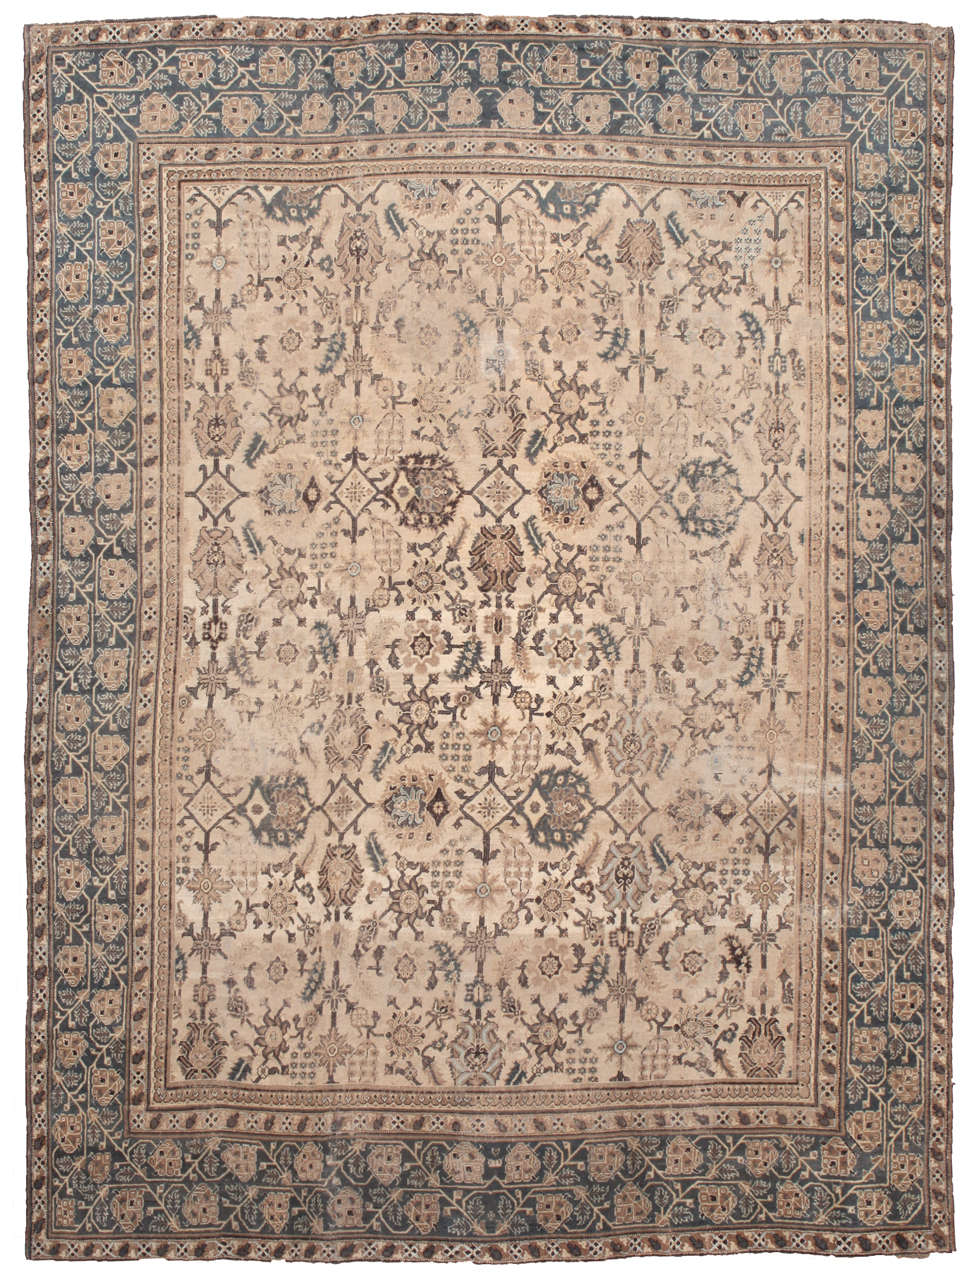 Antique Agra rugs are renowned for their beauty of color, elegance of drawing and perhaps above all fineness of knotting. Agra colors are mostly red yellow green and ivory. The design is famous for its floral tendrils, angular vines and stars.